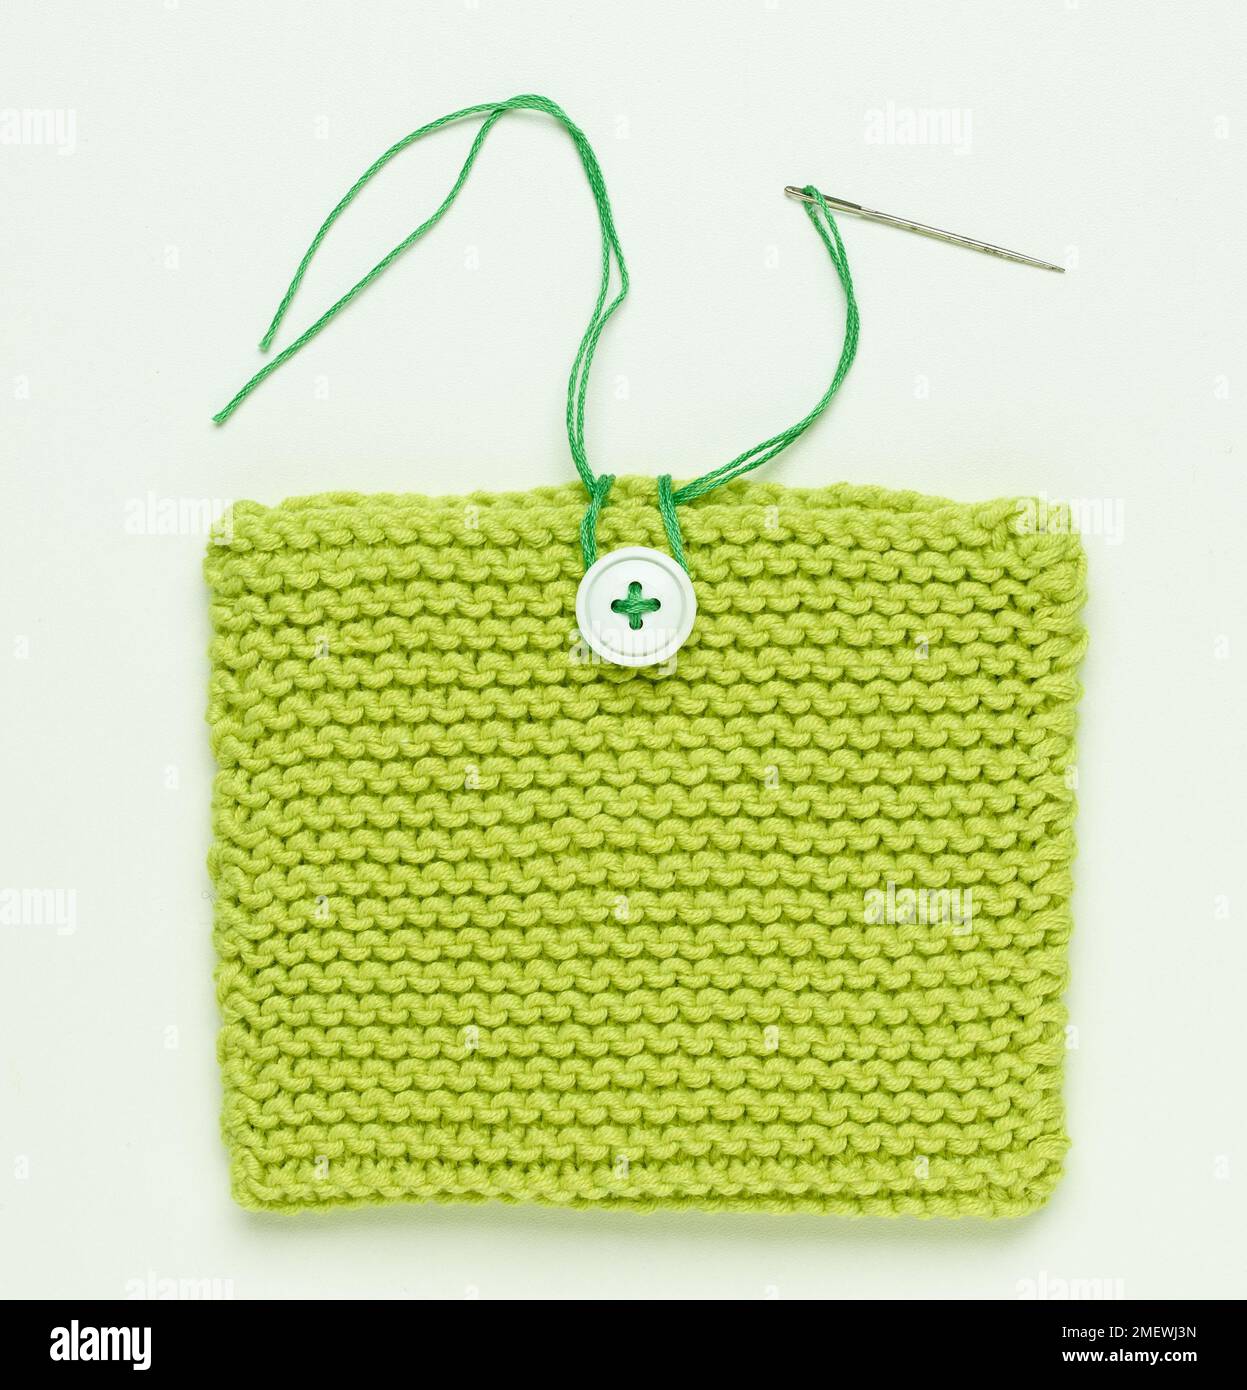 Steps for making knitted bag in green yarn, with button fastening, long green ribbon handles, and ribbon trim. Stock Photo